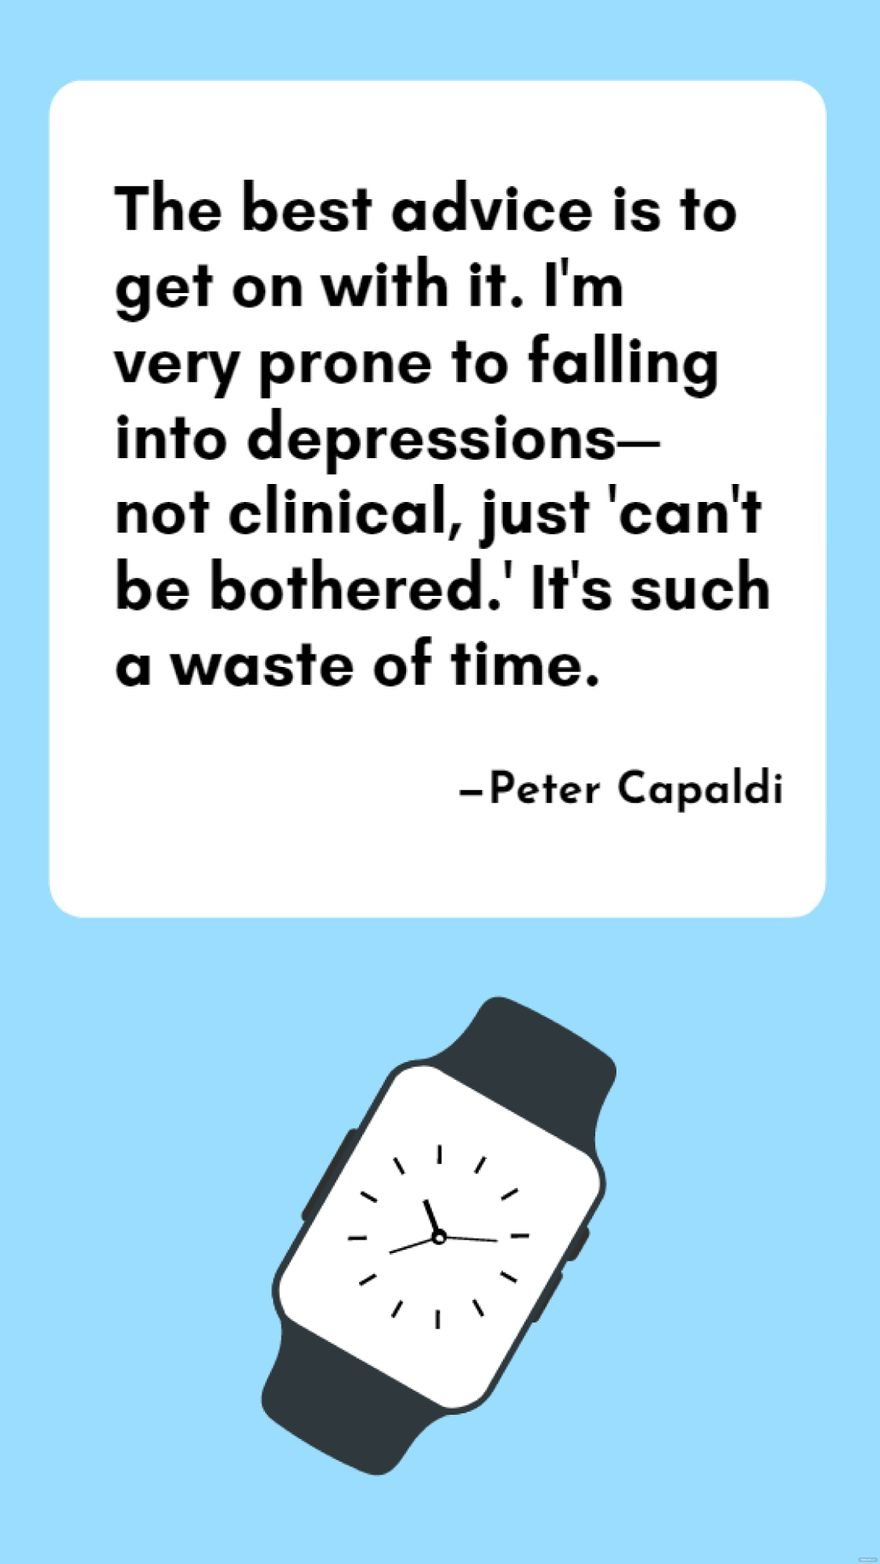 Peter Capaldi - The best advice is to get on with it. I'm very prone to falling into depressions - not clinical, just 'can't be bothered.' It's such a waste of time.